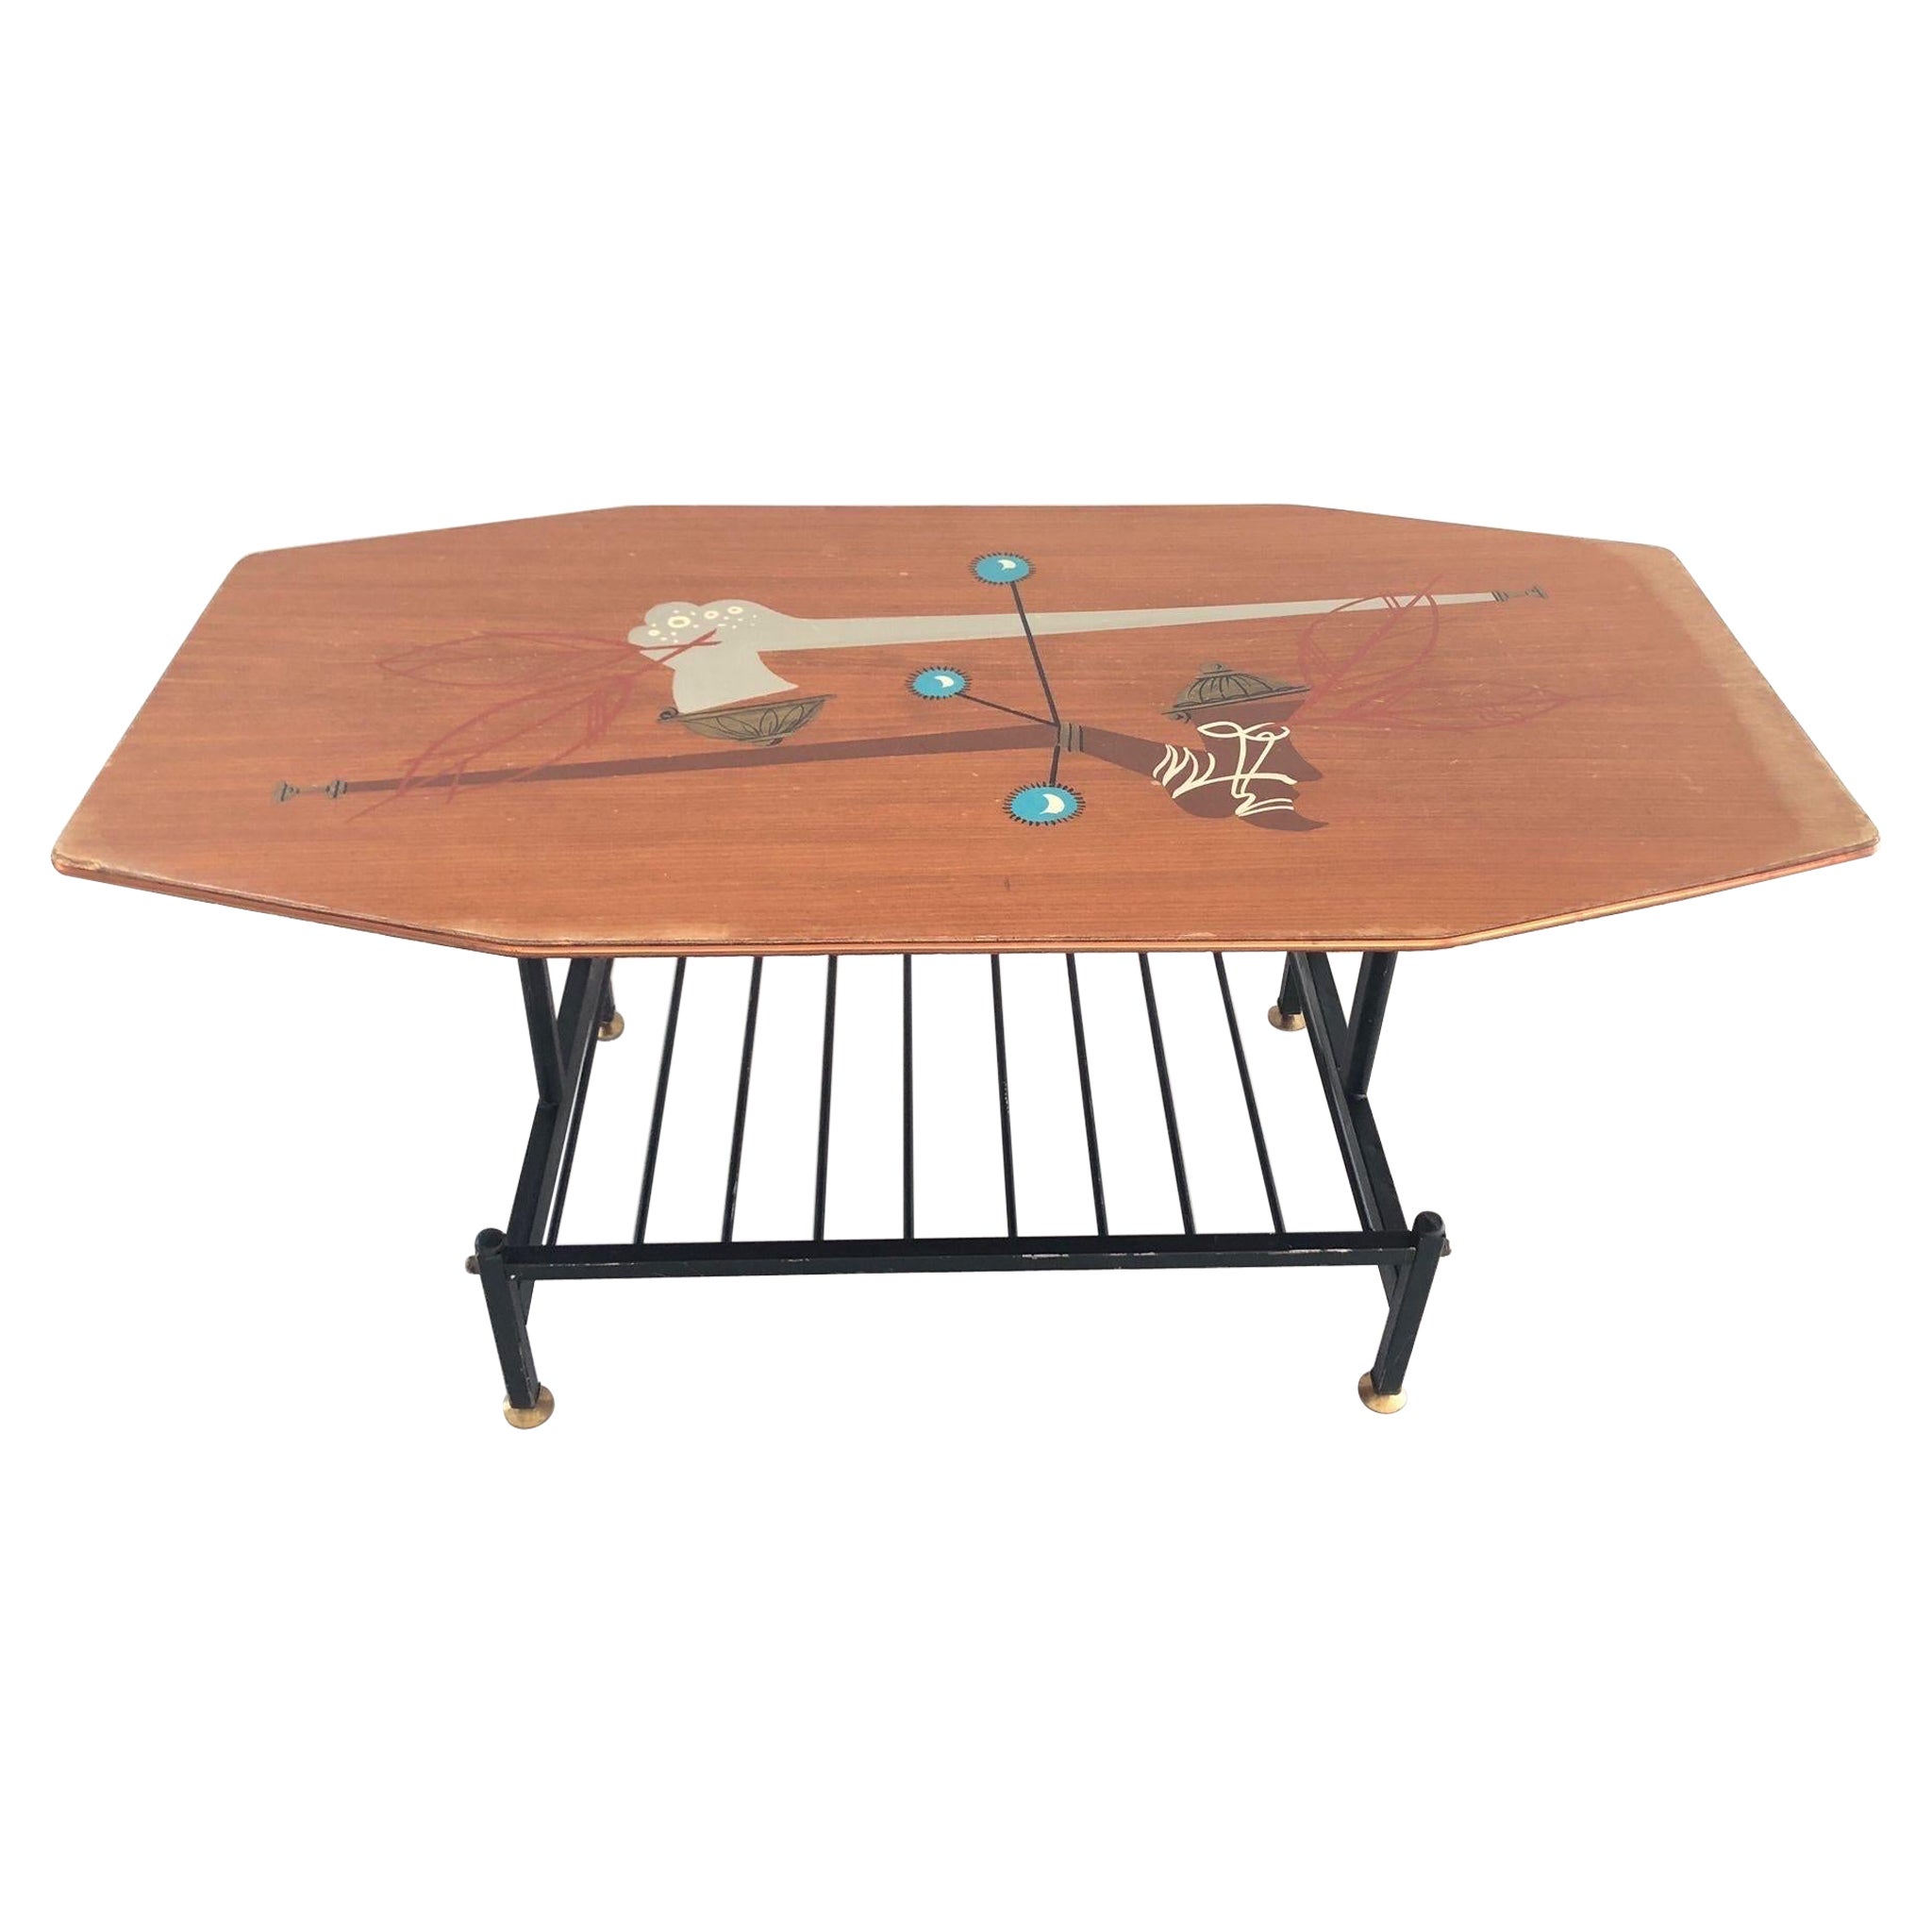 Hand-painted Illustrated Wood Coffee or Center Table, 1950s, Italy For Sale